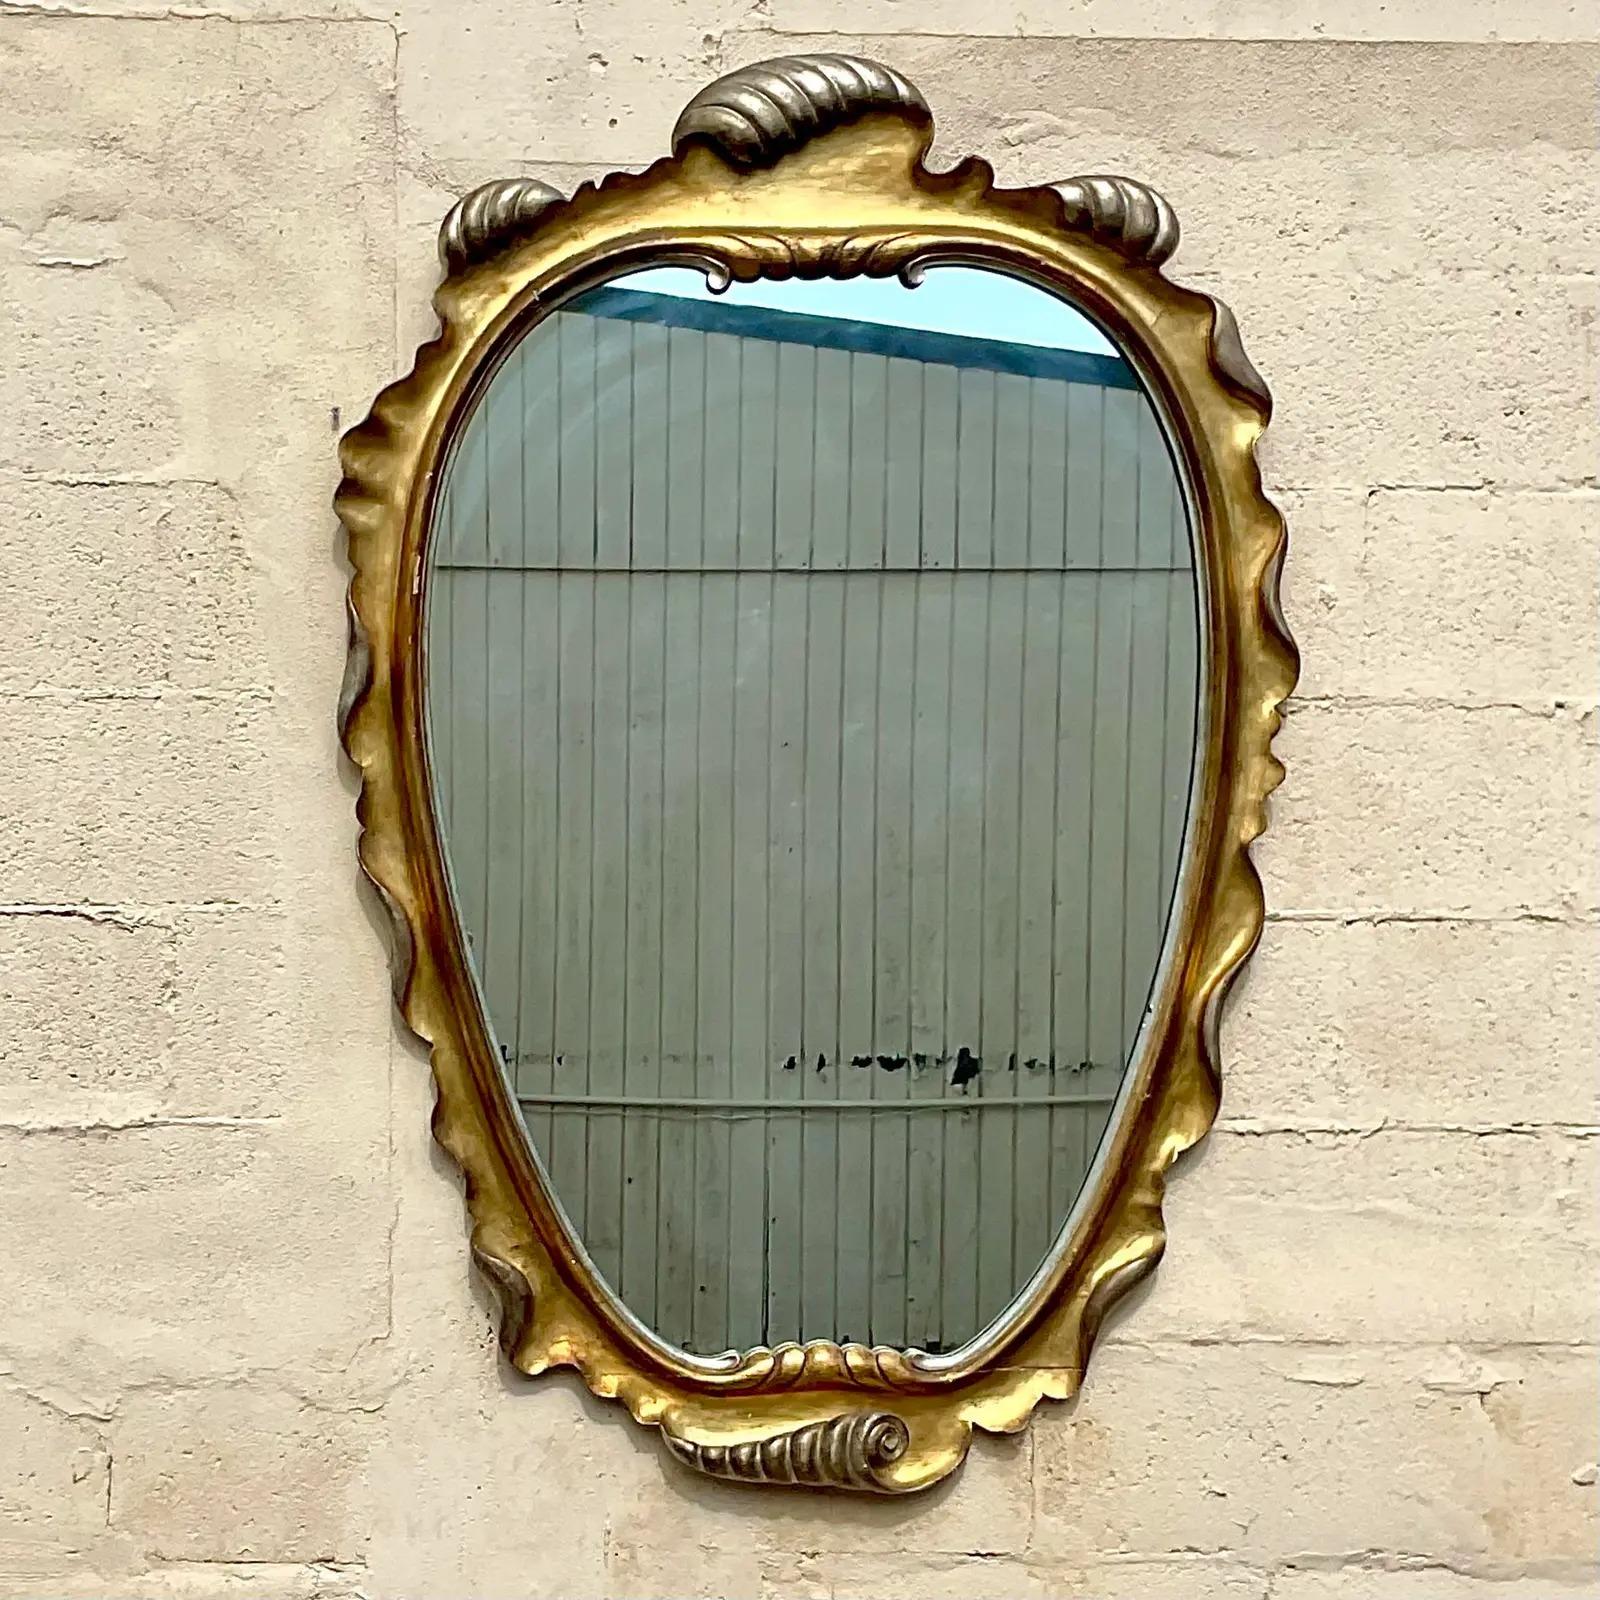 Vintage Regency gilt wall mirror. Made by the Fratelli Paoletti Firenze group in Italy. Beautiful wave design in the striking large frame mirror. Acquired from a Miami estate.